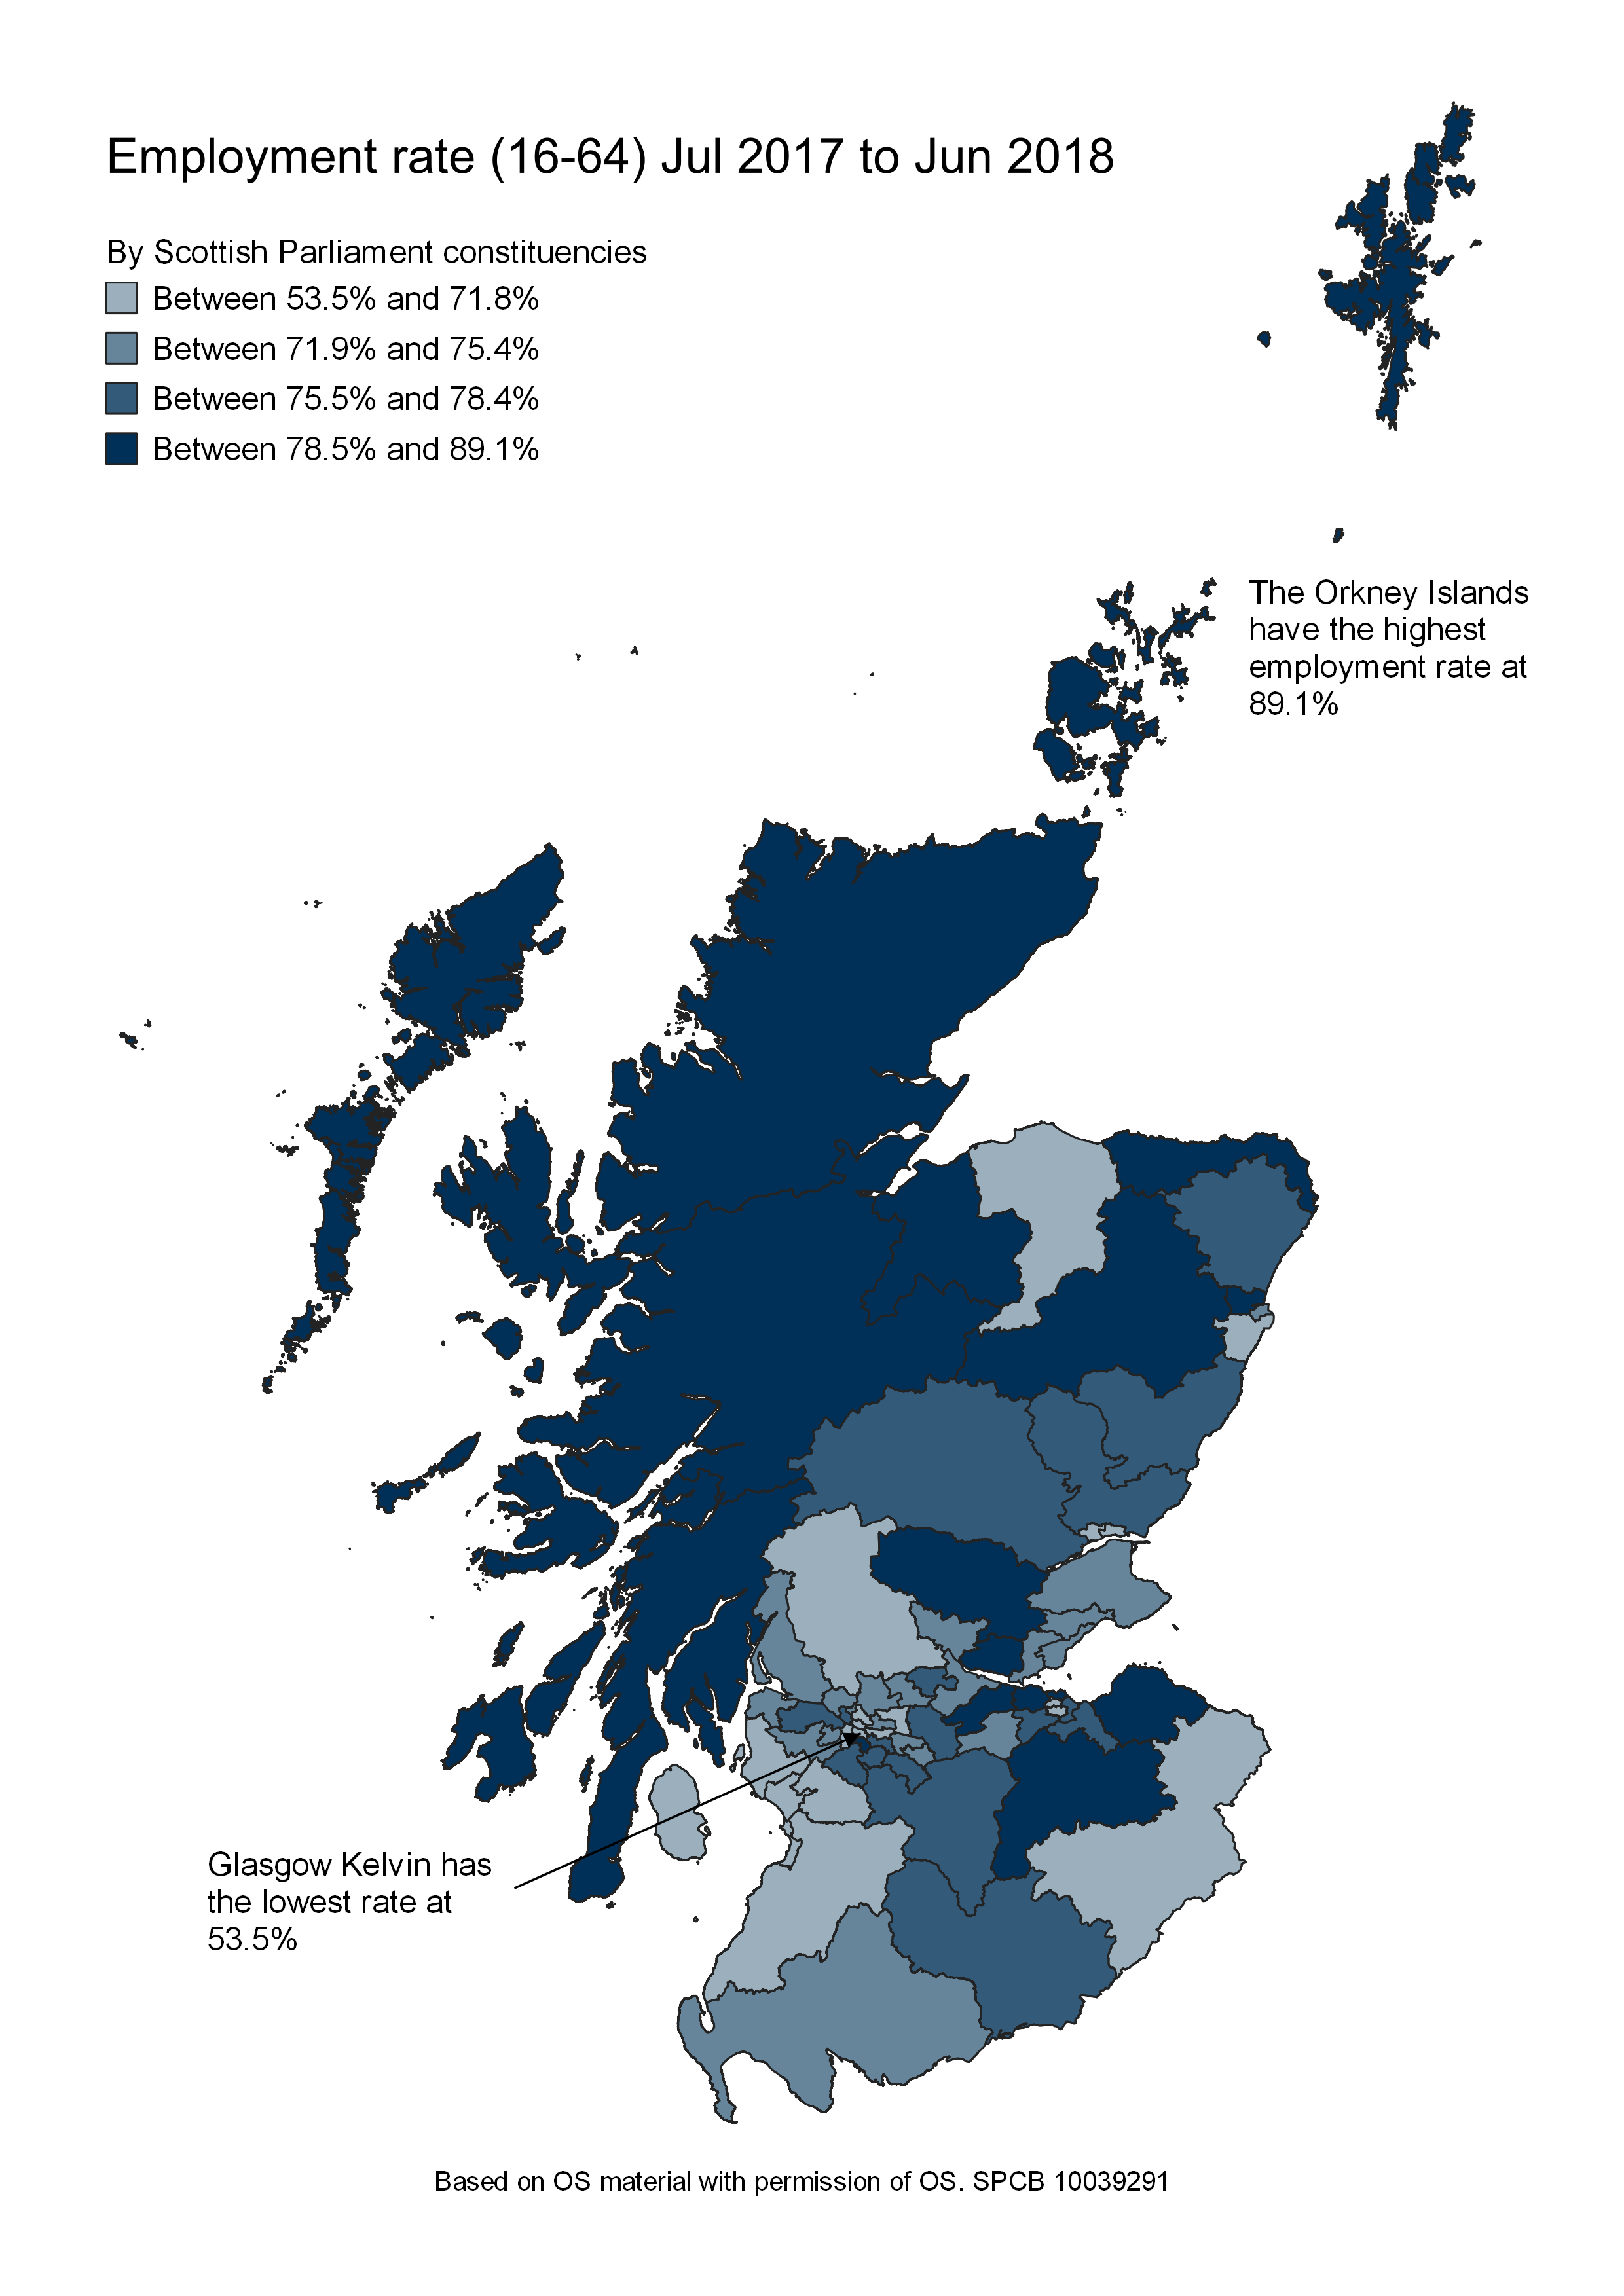 The employment rate for people aged between 16 and 64 over for each Scottish Parliamentary constituency.